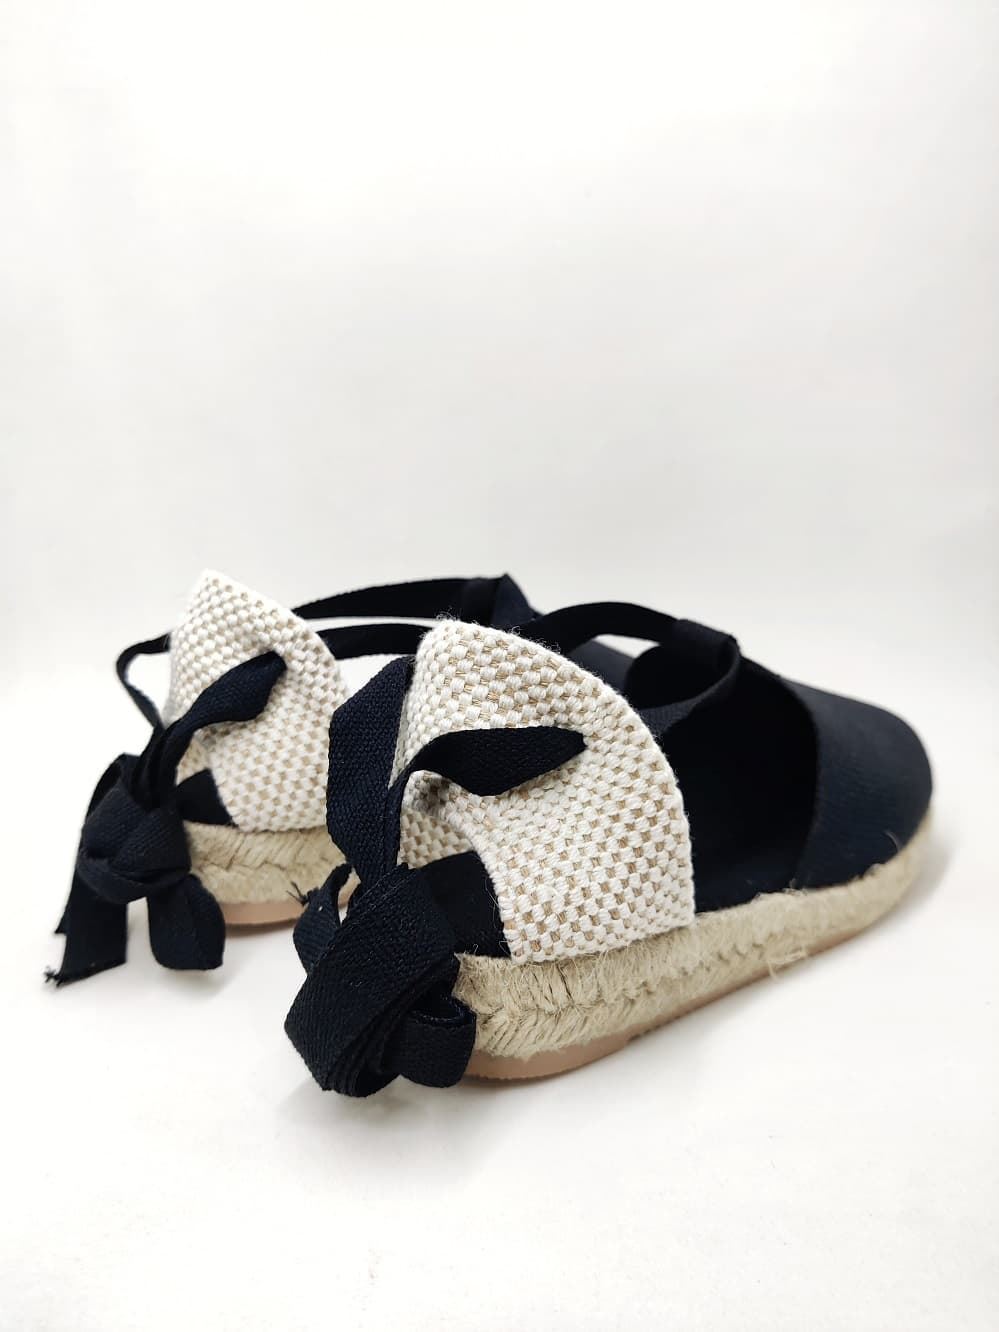 Black wedge espadrilles with ribbons for girls and women - Image 5